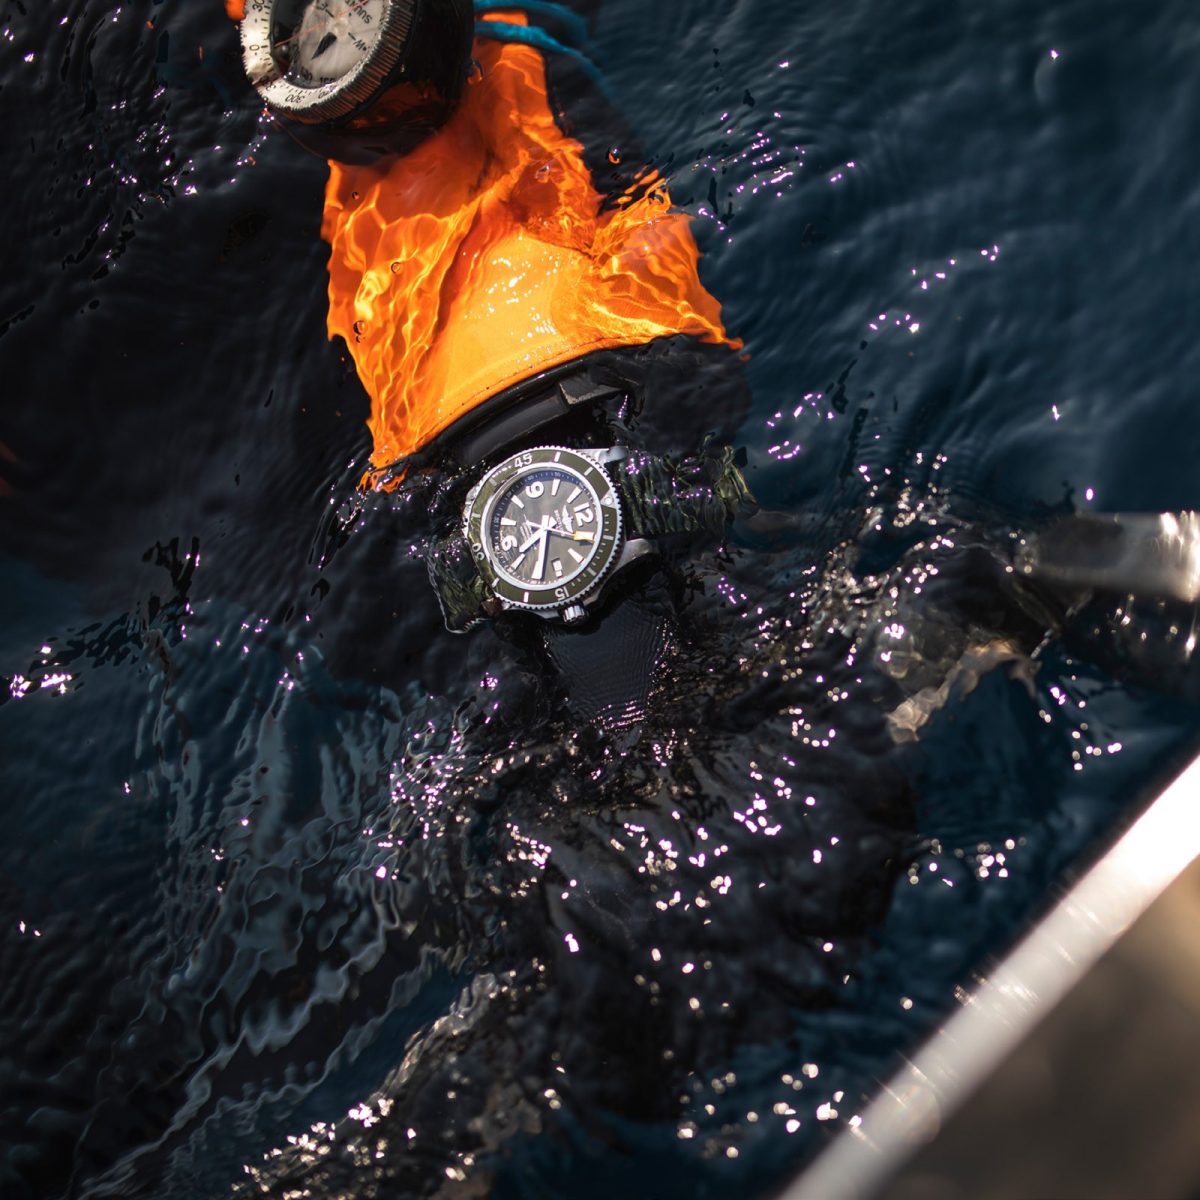 A sustainable Superocean collection by Breitling